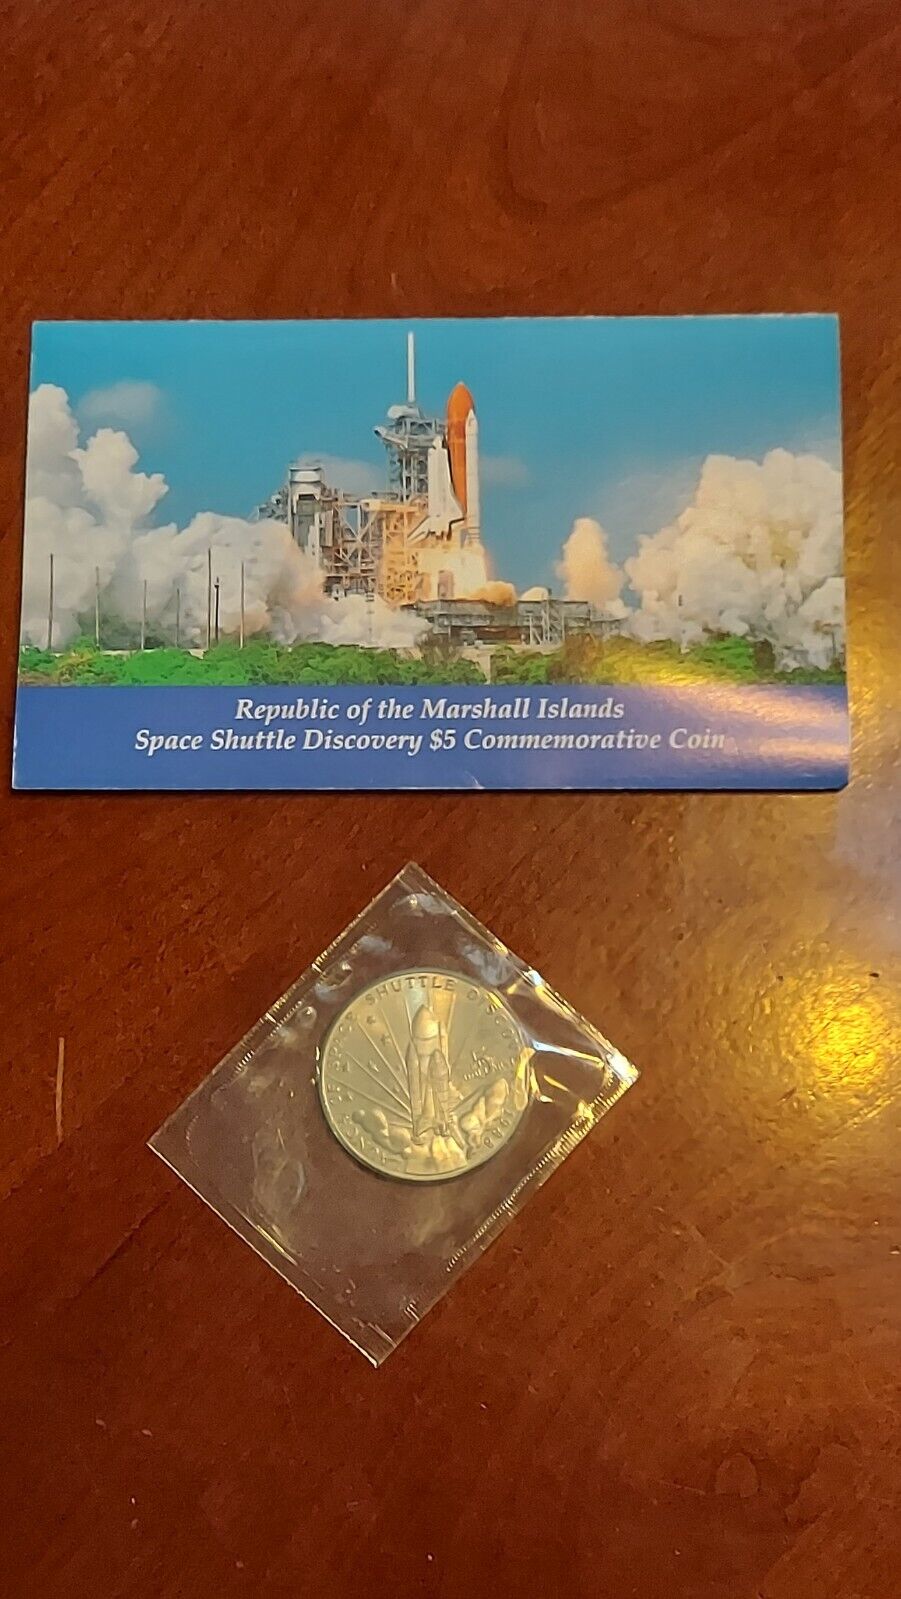 1988 space shuttle discovery coin